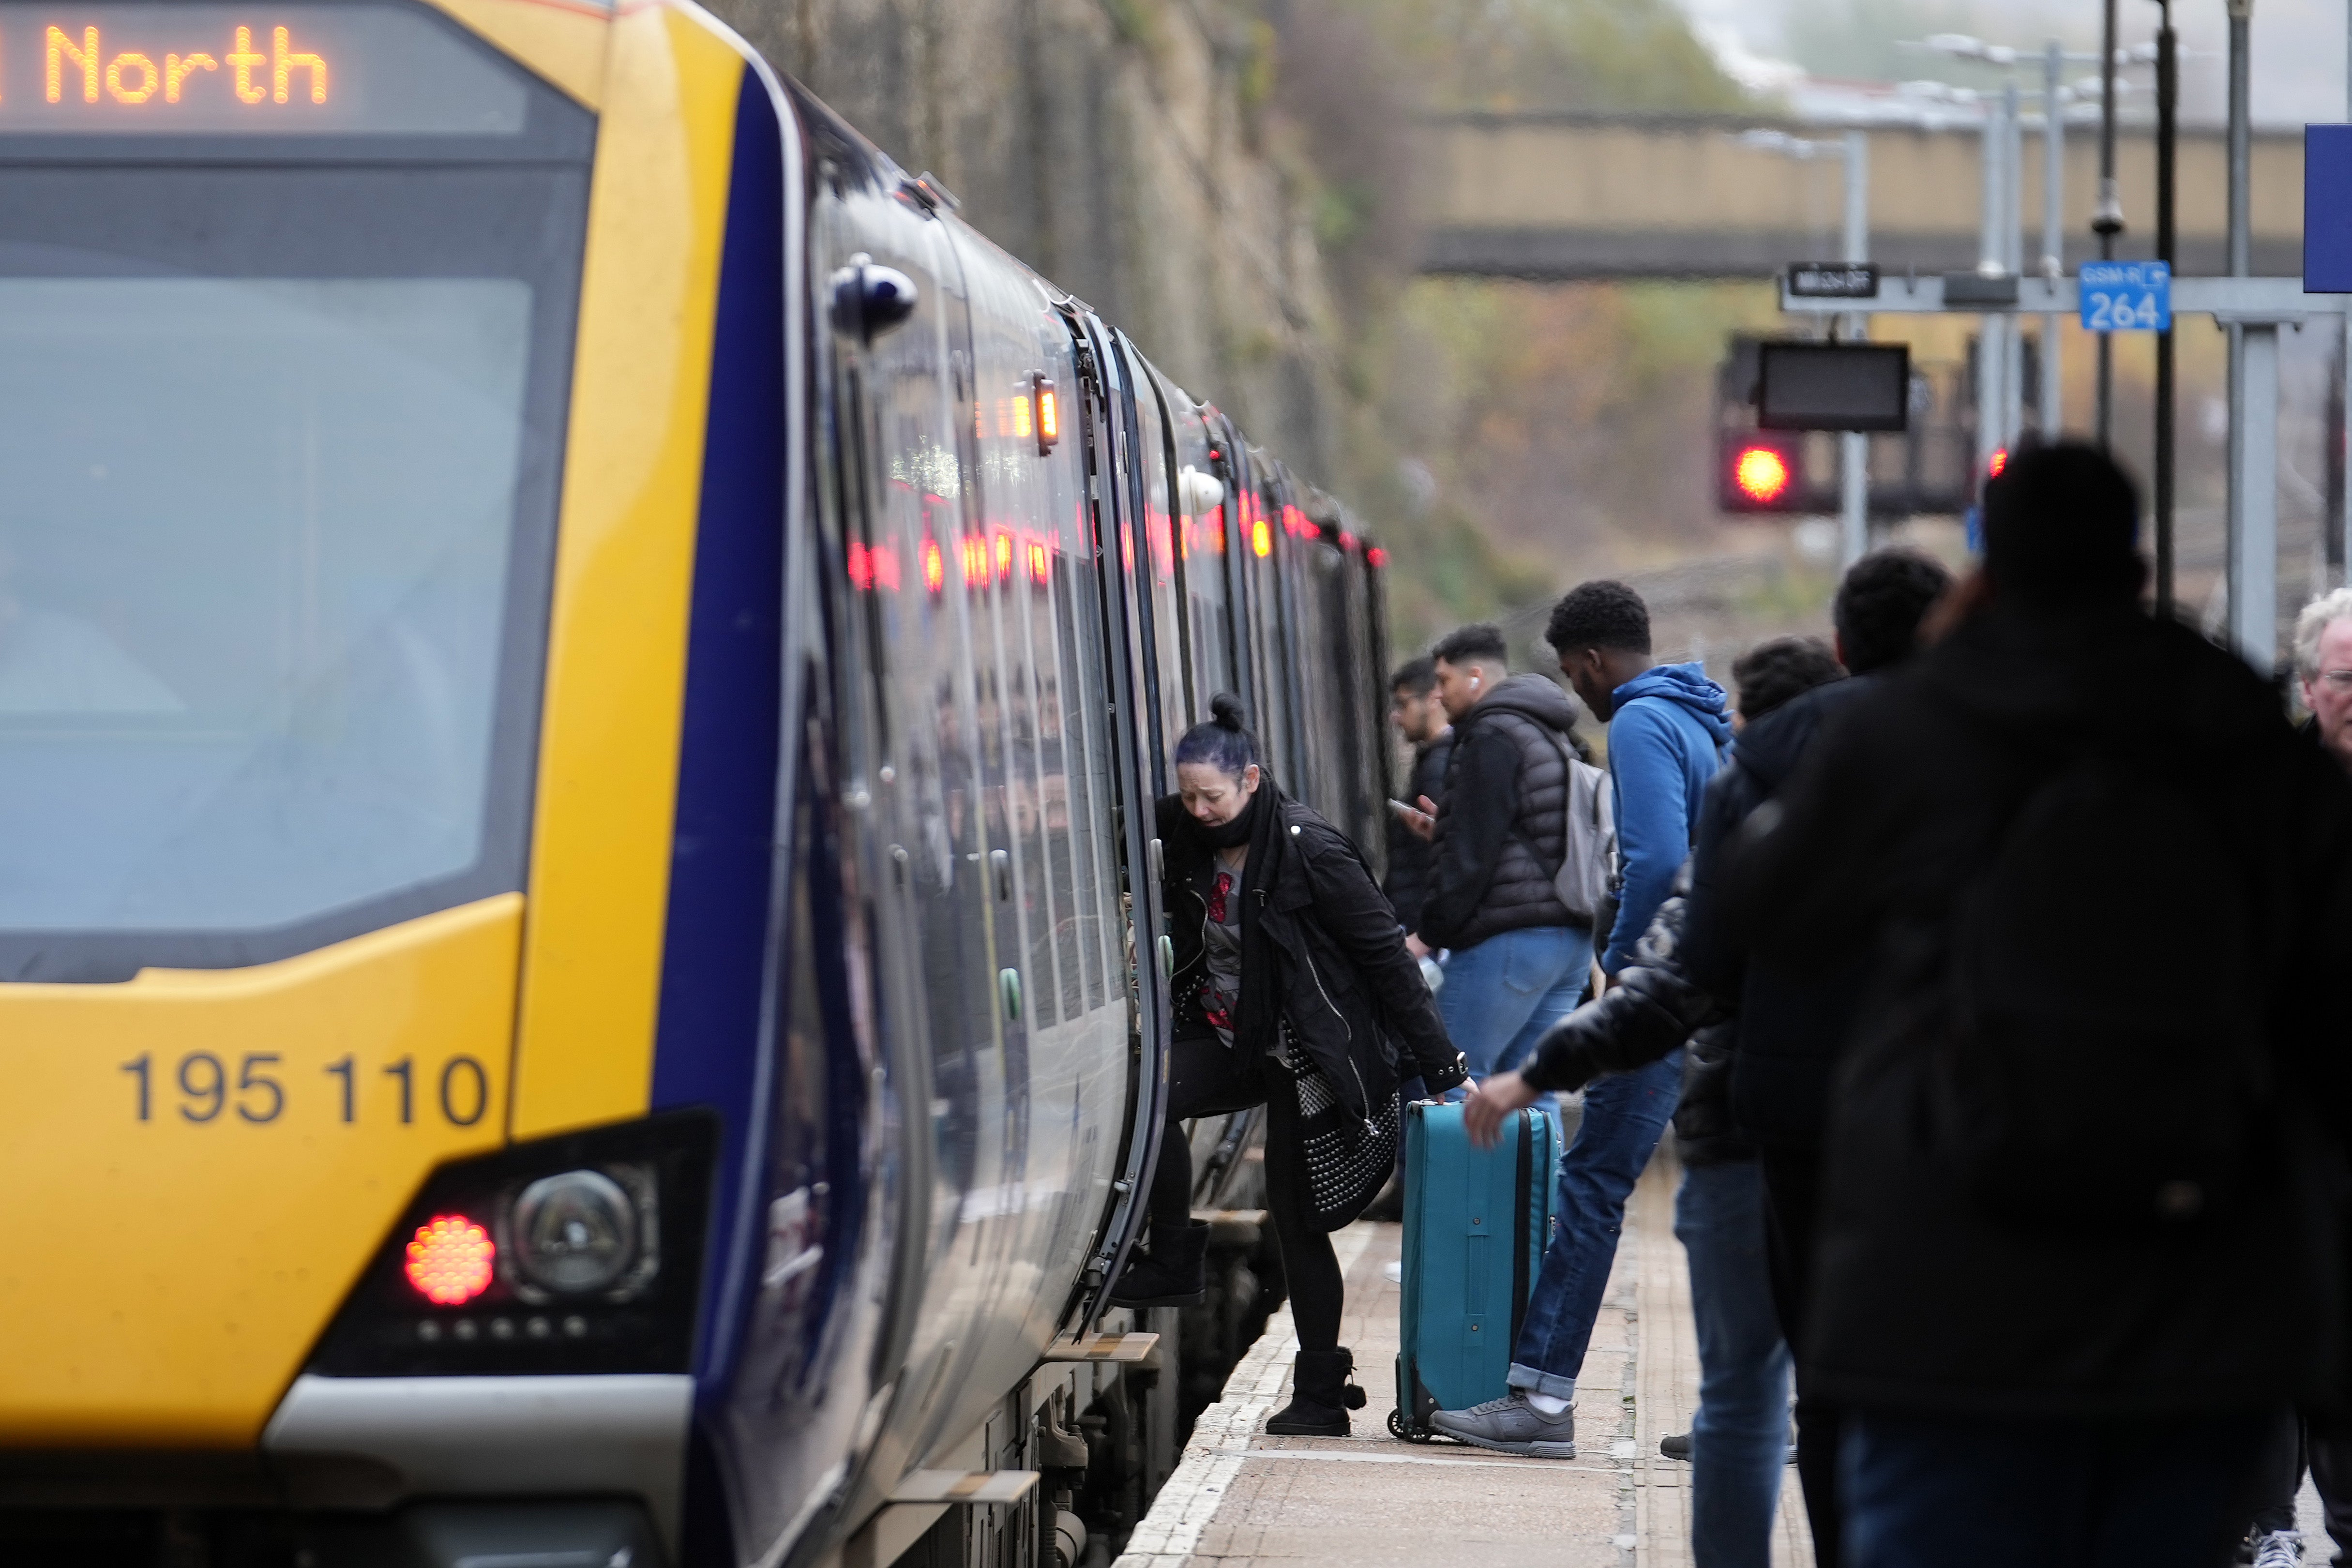 Passengers arrive and depart on Great Northern trains at Bradford Interchange station on Thursday